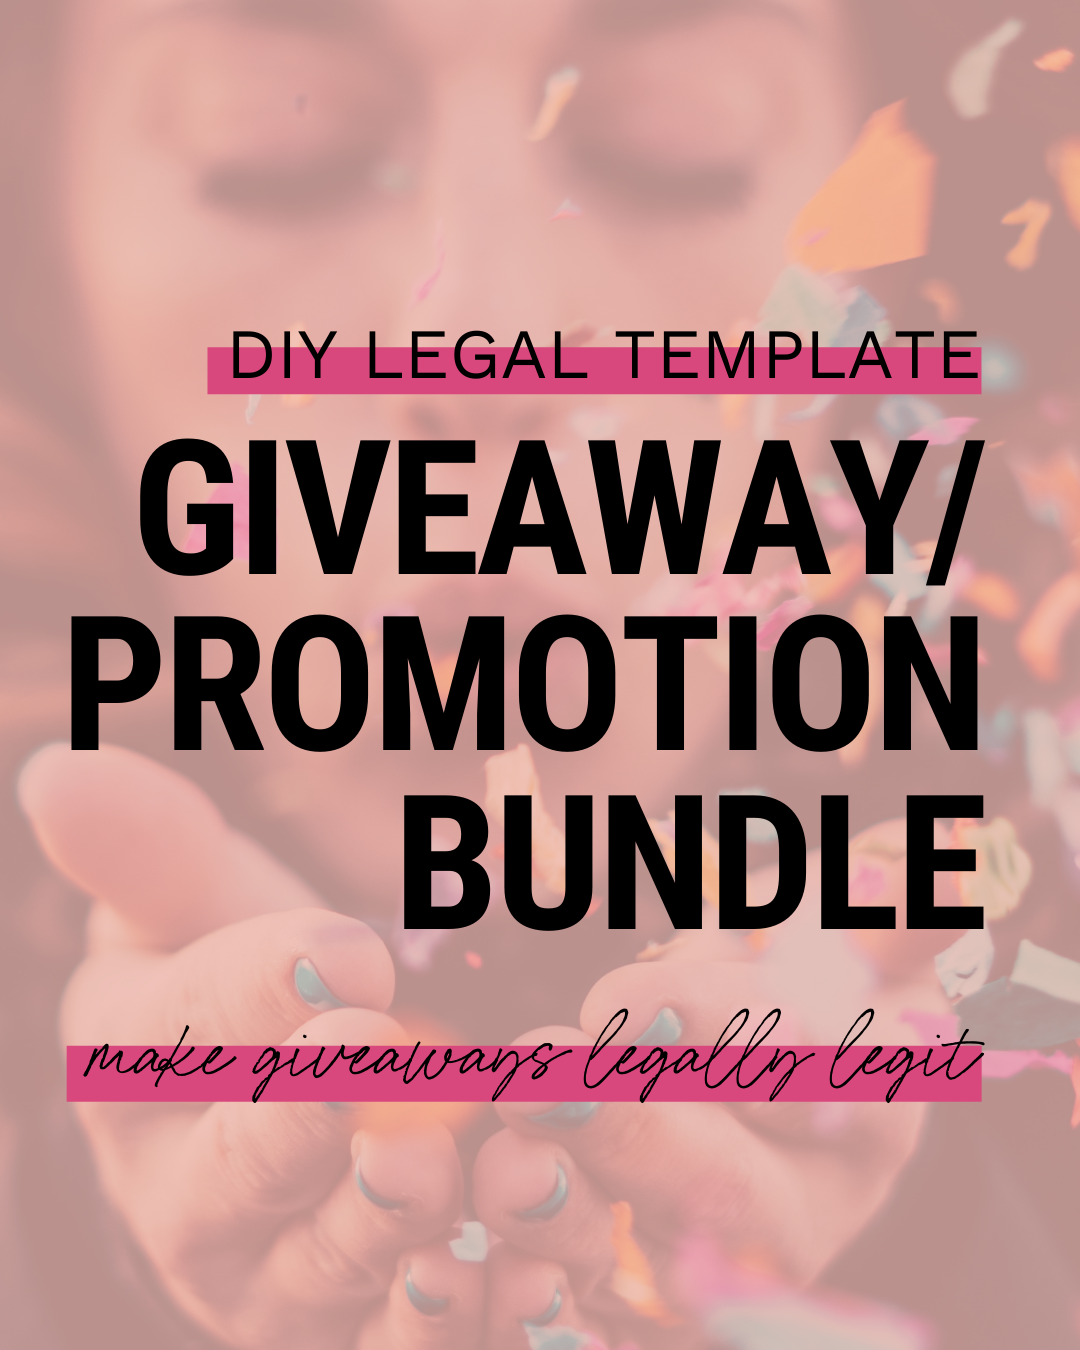 Promotions & Giveaways - Images